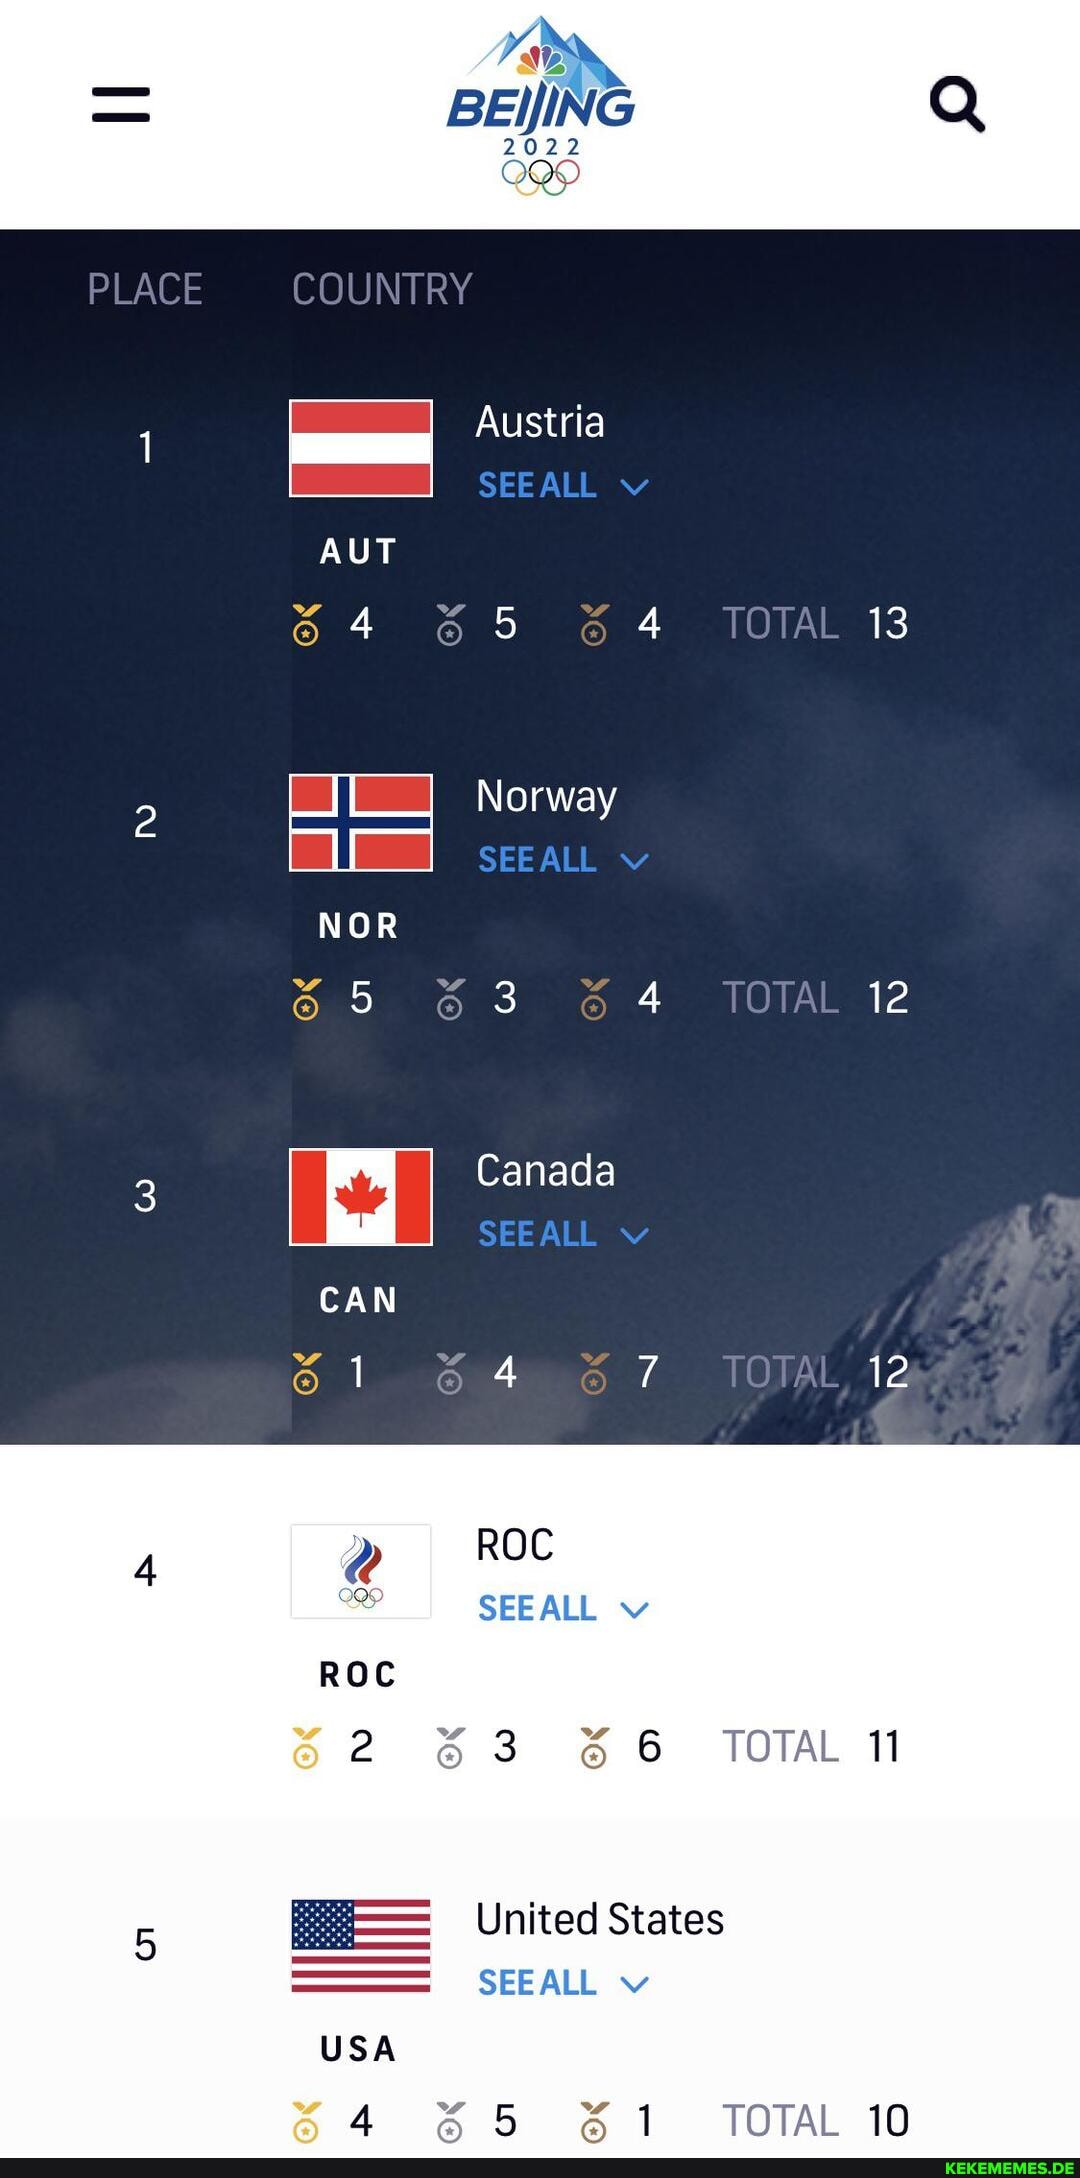 BEIJING 2022 PLACE COUNTRY Austria SEEALL AUT 64 65 4 TOTAL 13 Norway NOR 65 63 